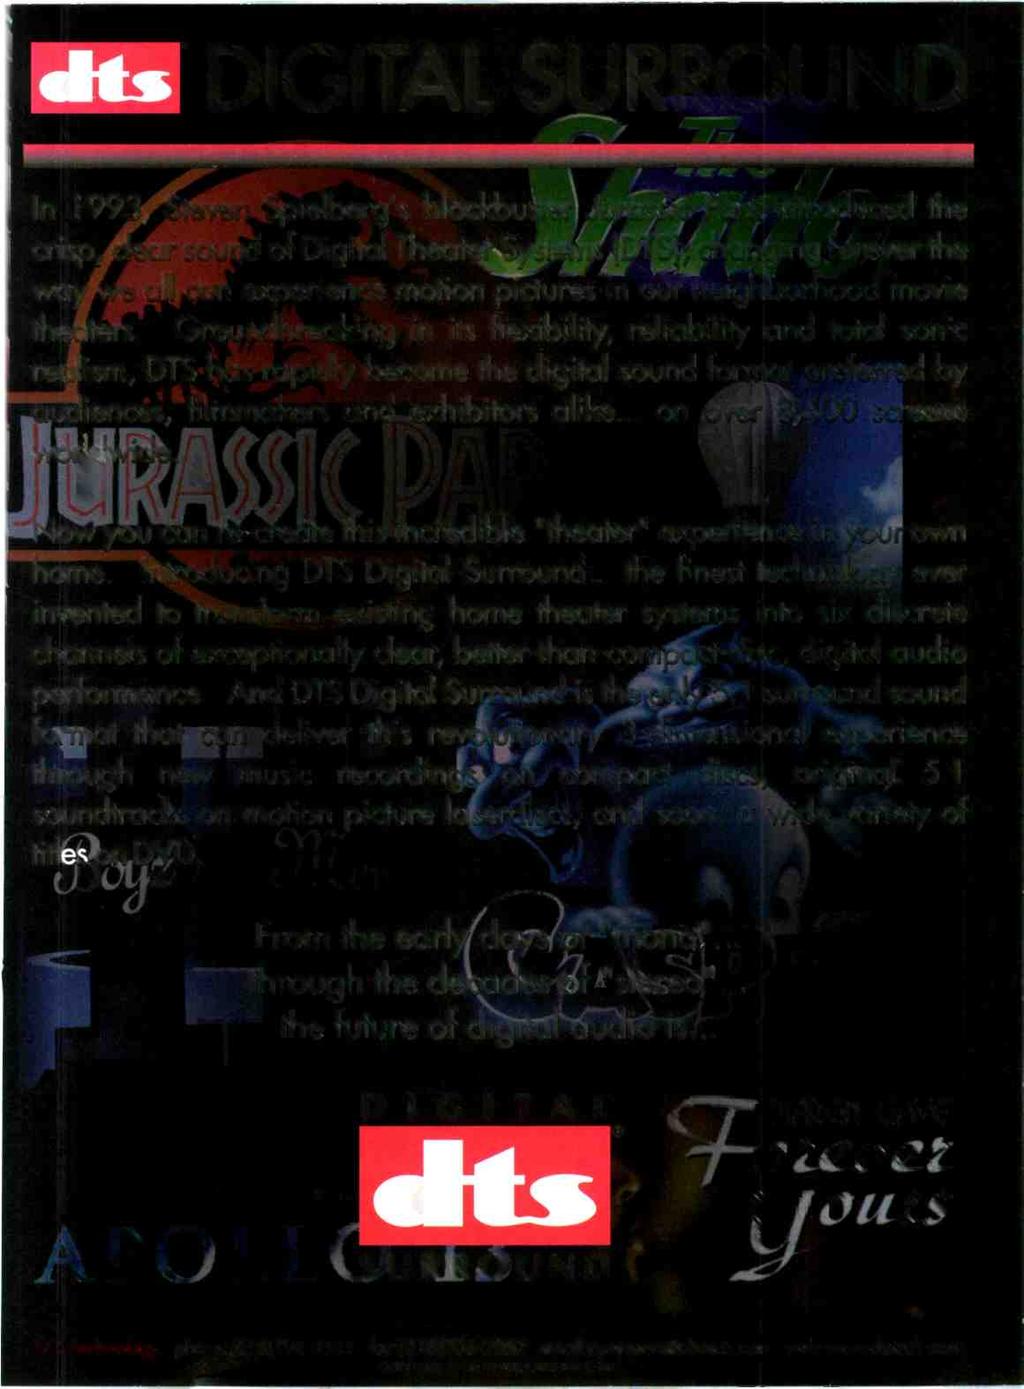 DIGITAL SURROUND In 1993, Steven Spielberg's blockbuster Jurassic Park introduced the crisp, clear sound of Digital Theater Systems (DTS), changing forever the way we all can experience motion